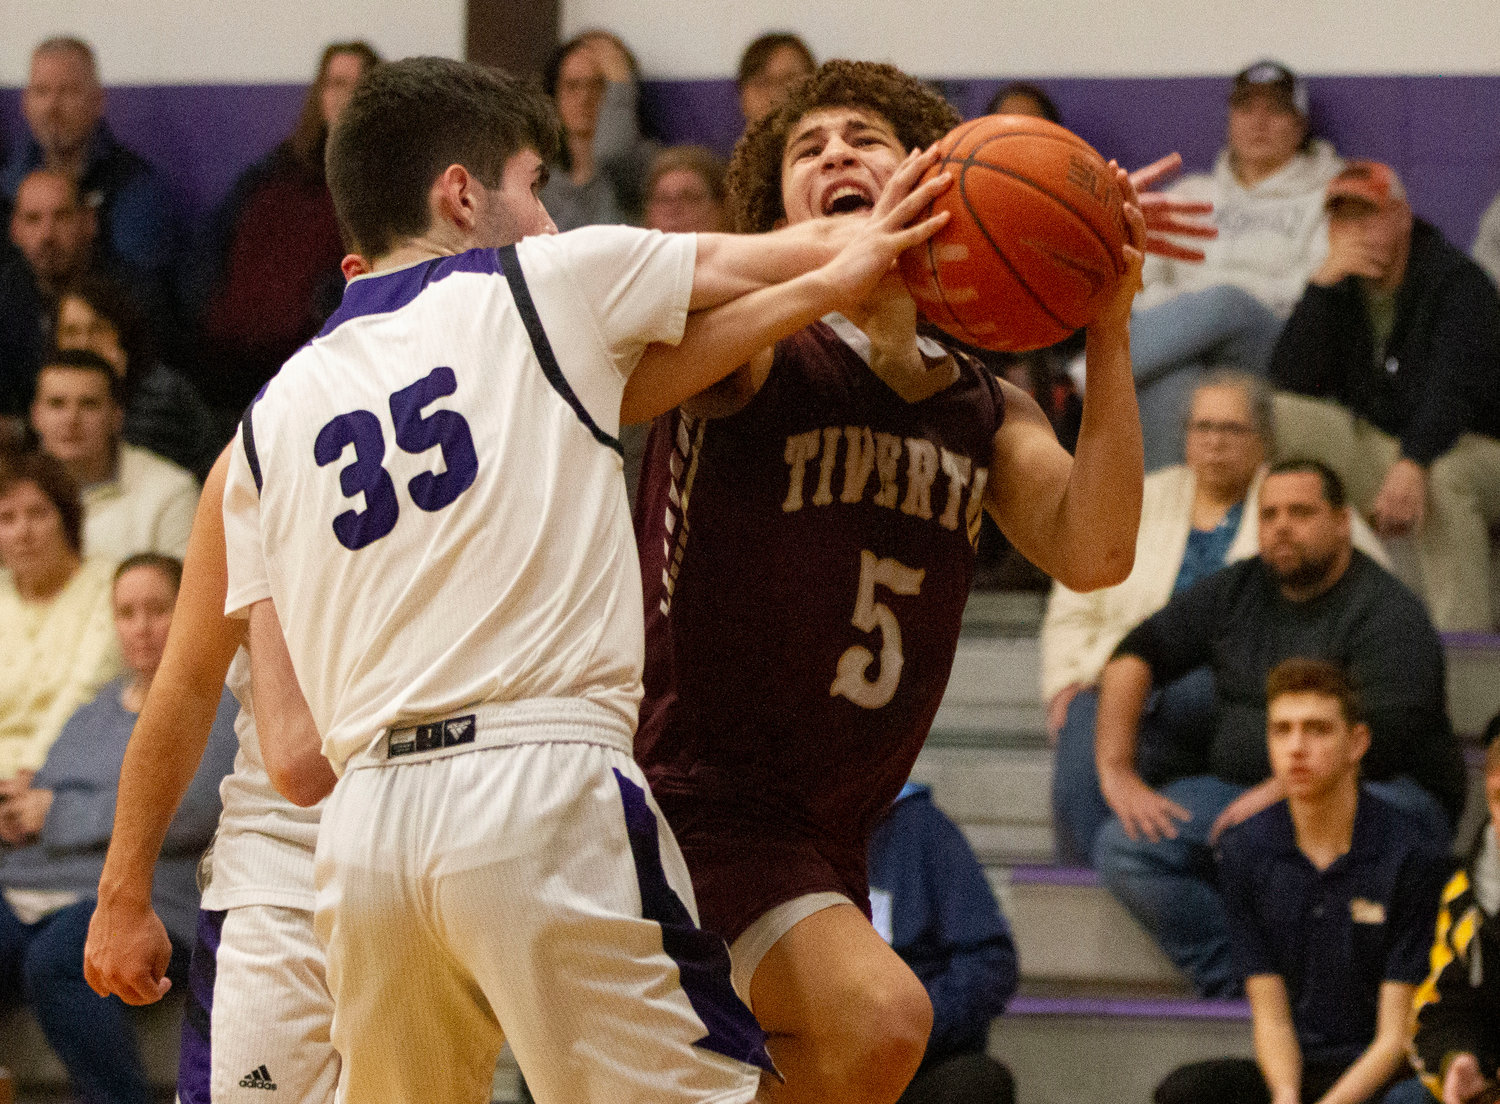 James Rustici fouls Tristin White as he attempts to get to the hoop.